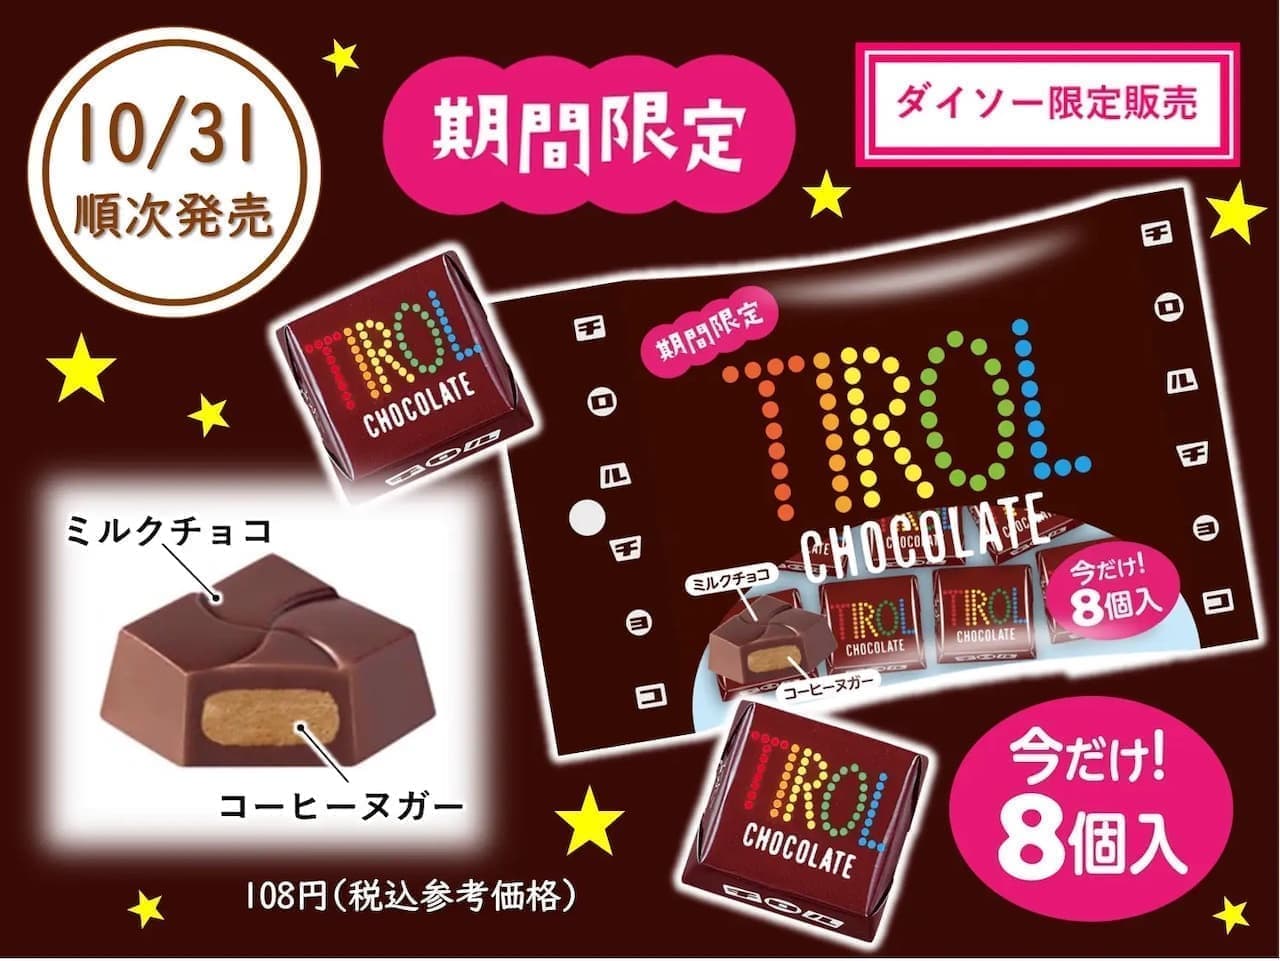 Coffee Nougat Pouch" by Chiroruco appears at Daiso.